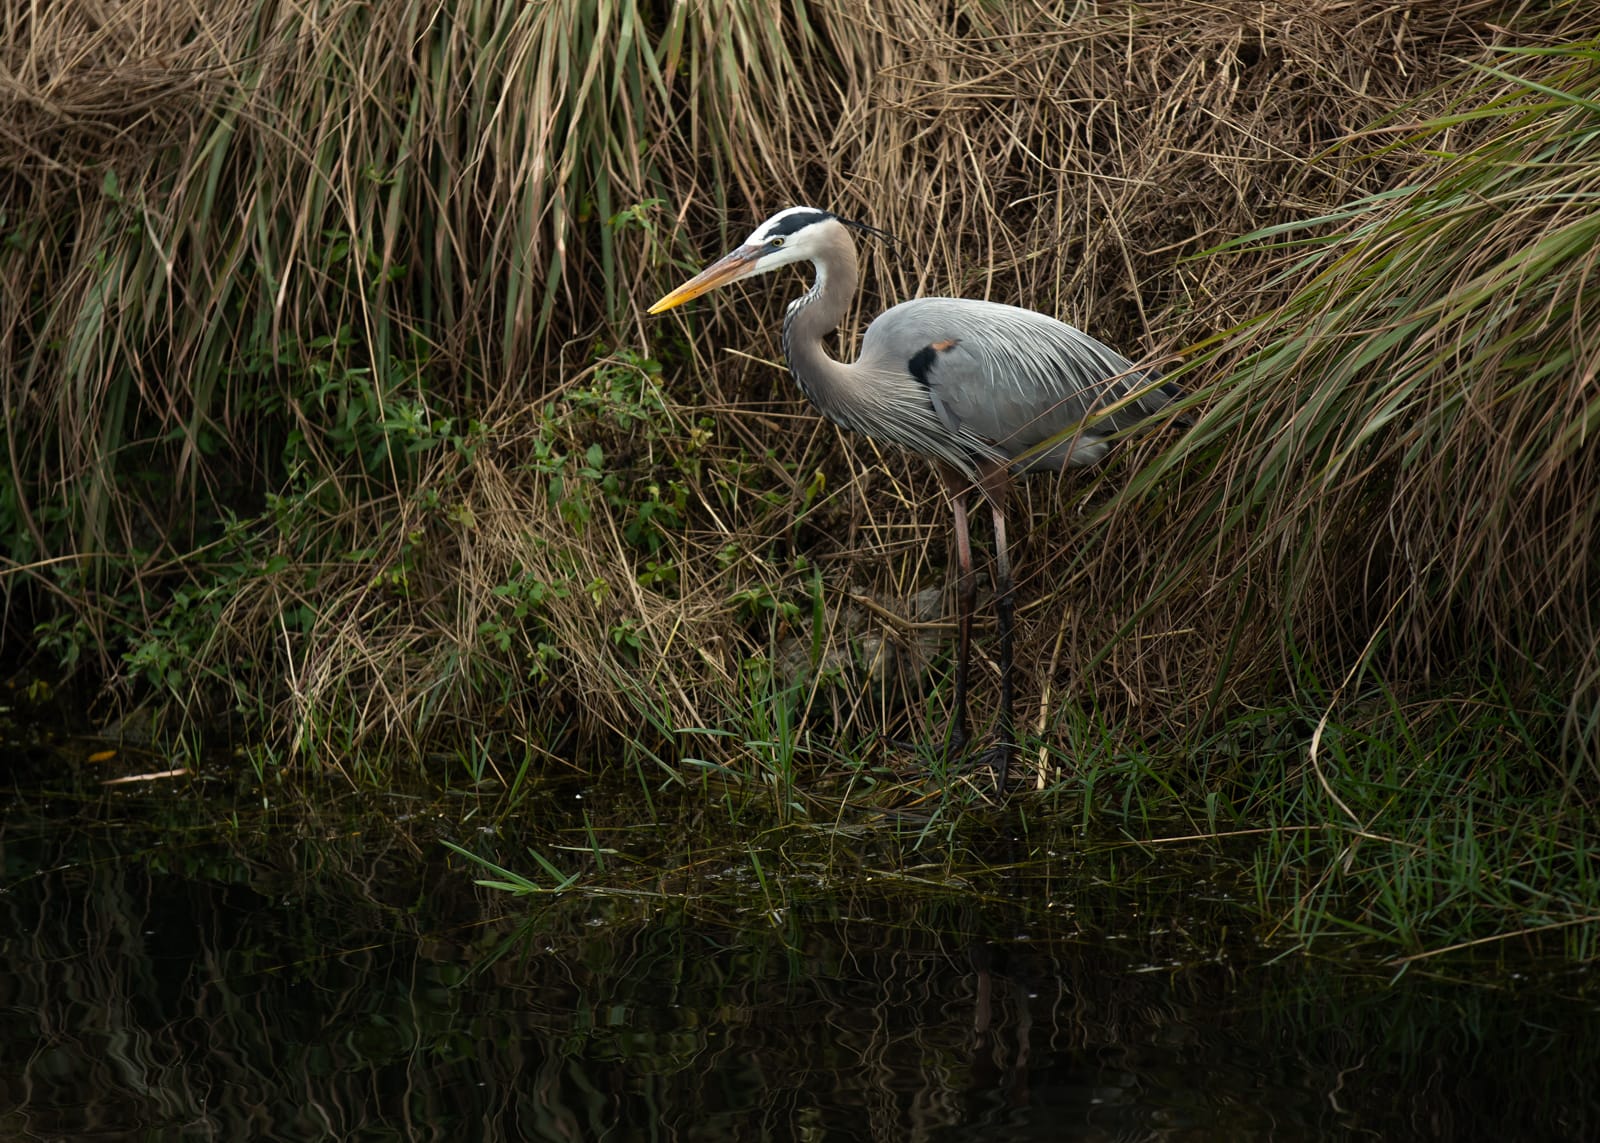 A Great blue heron on the bank of a creek in the Everglades